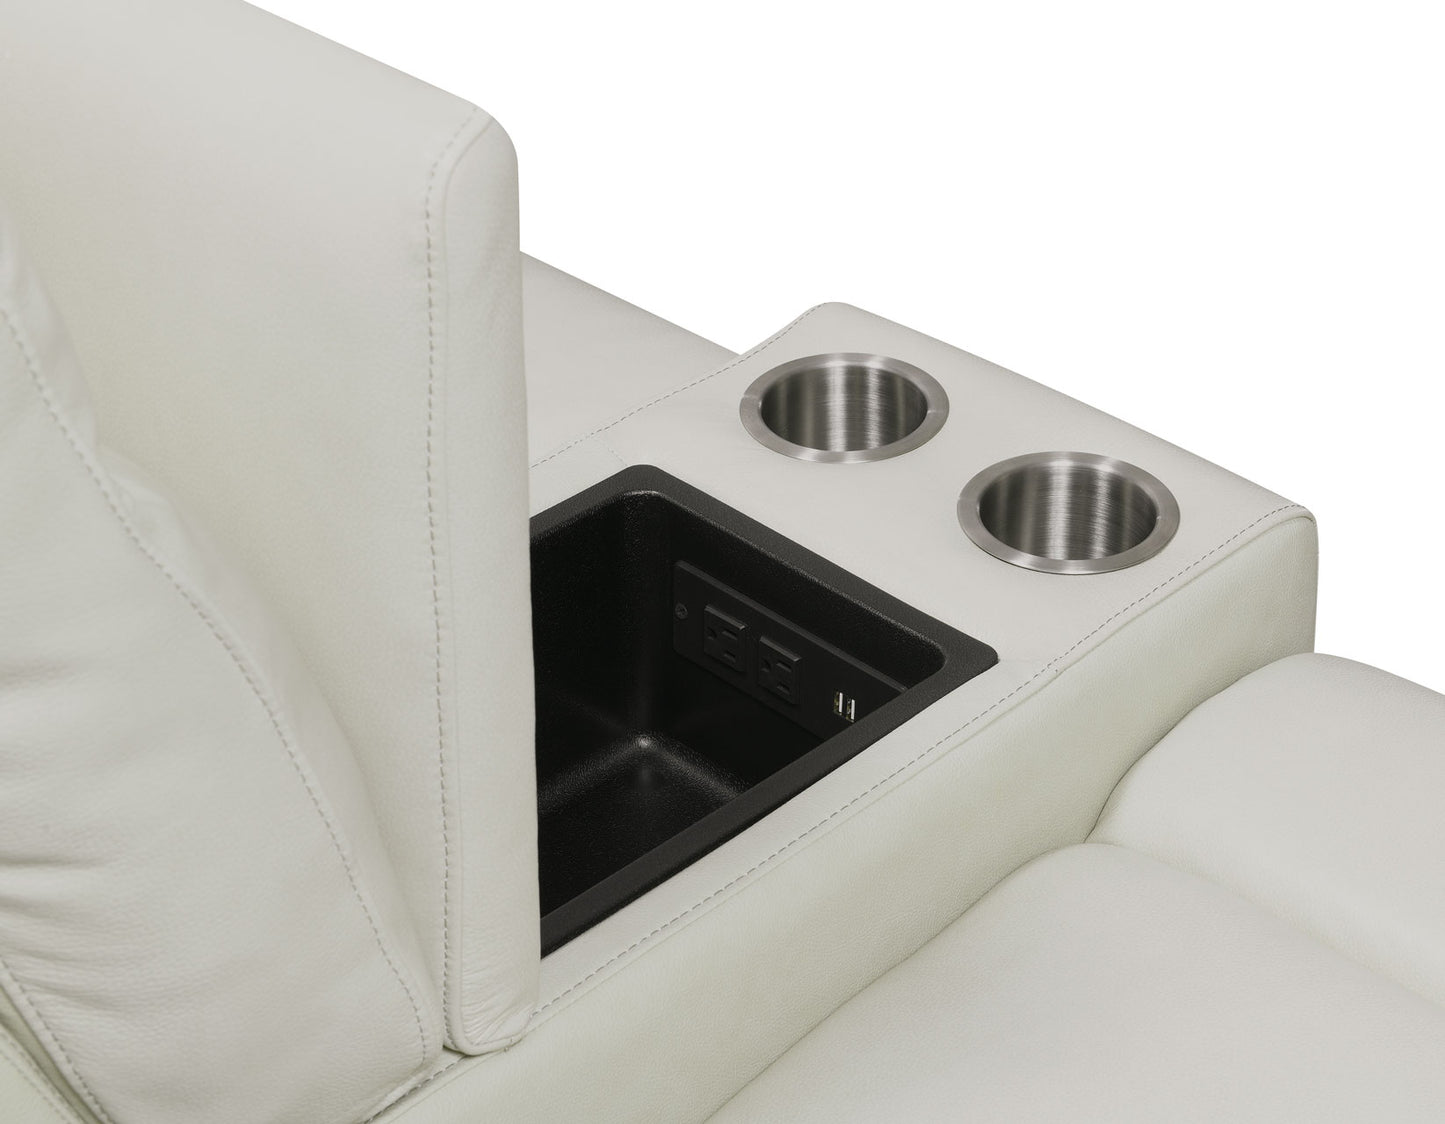 Duval Dual-Power Reclining Console Loveseat, Ivory